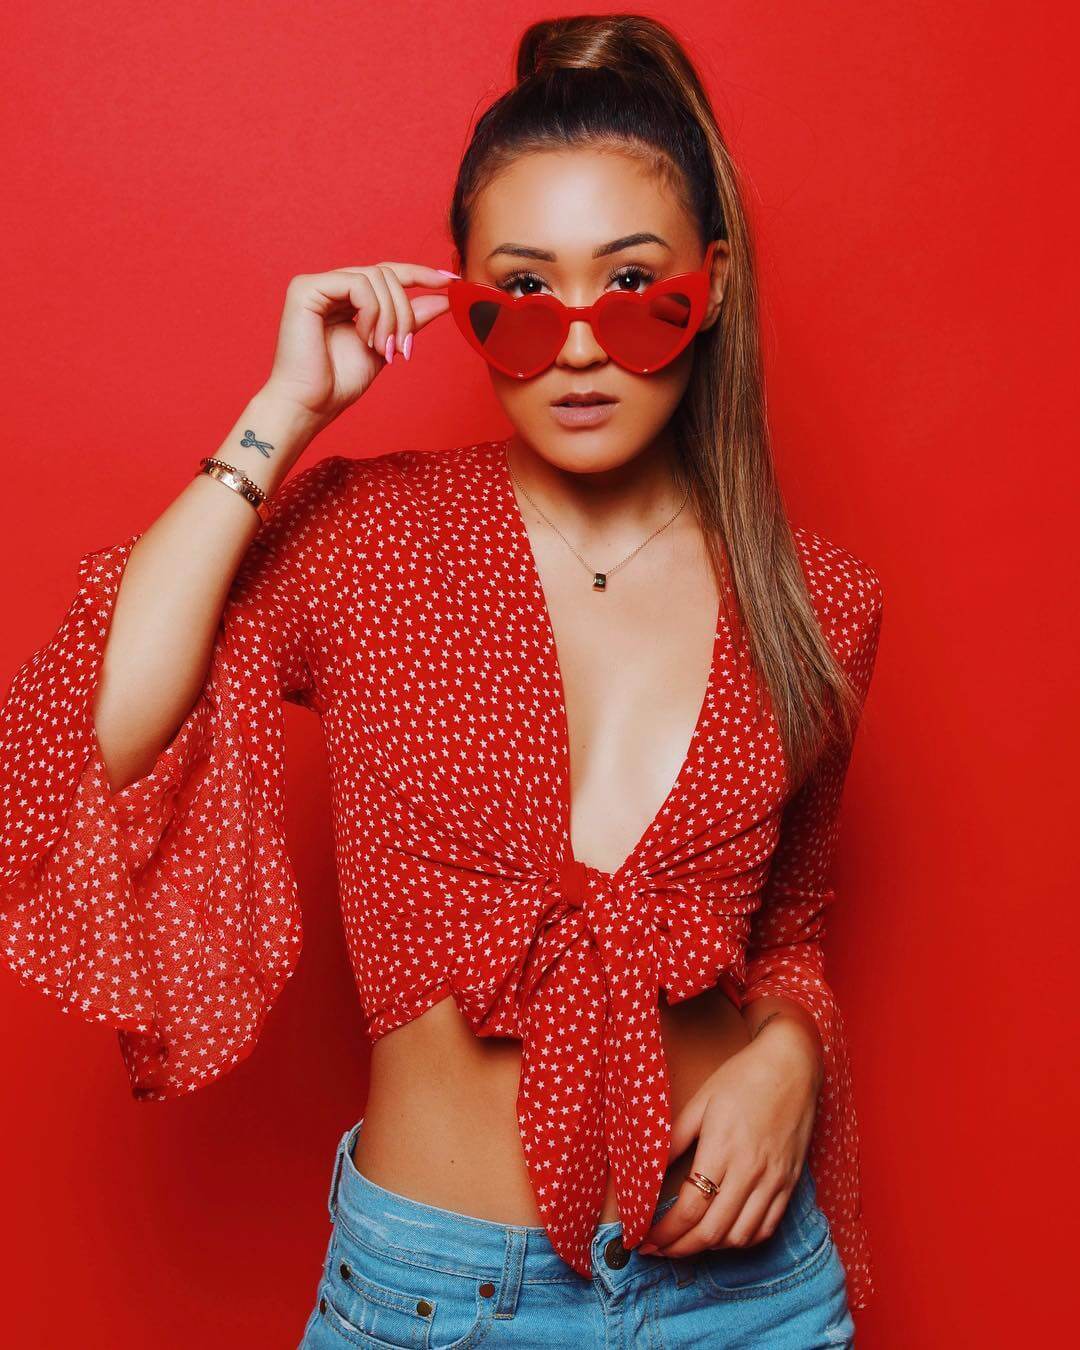 51 Hottest LaurDIY Big Butt Pictures Which Will Make You Swelter All Over 18